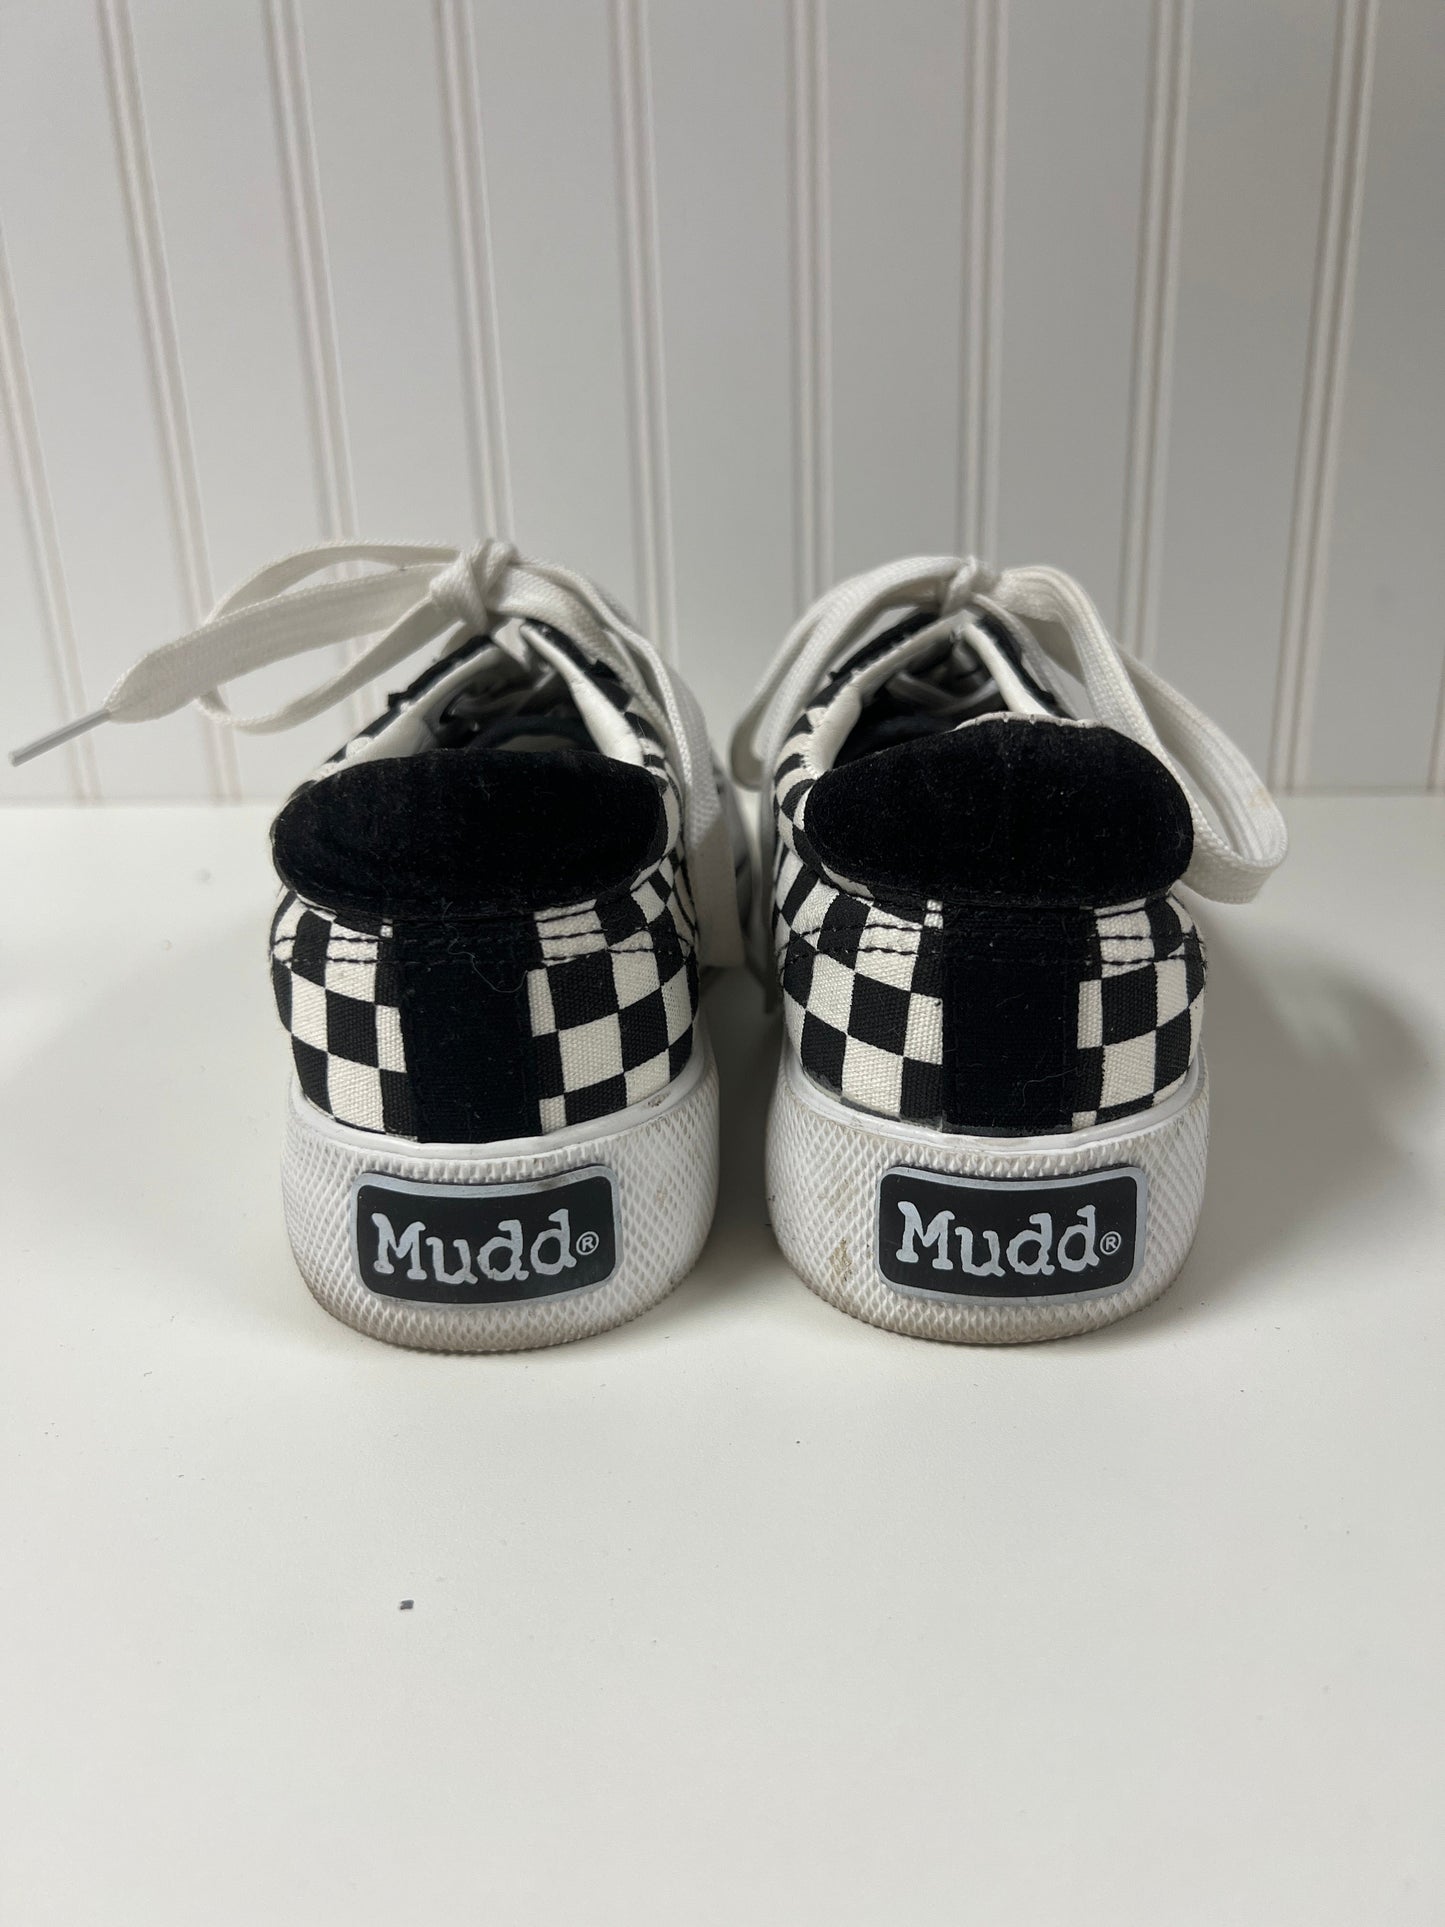 Checkered Pattern Shoes Sneakers Mudd, Size 8